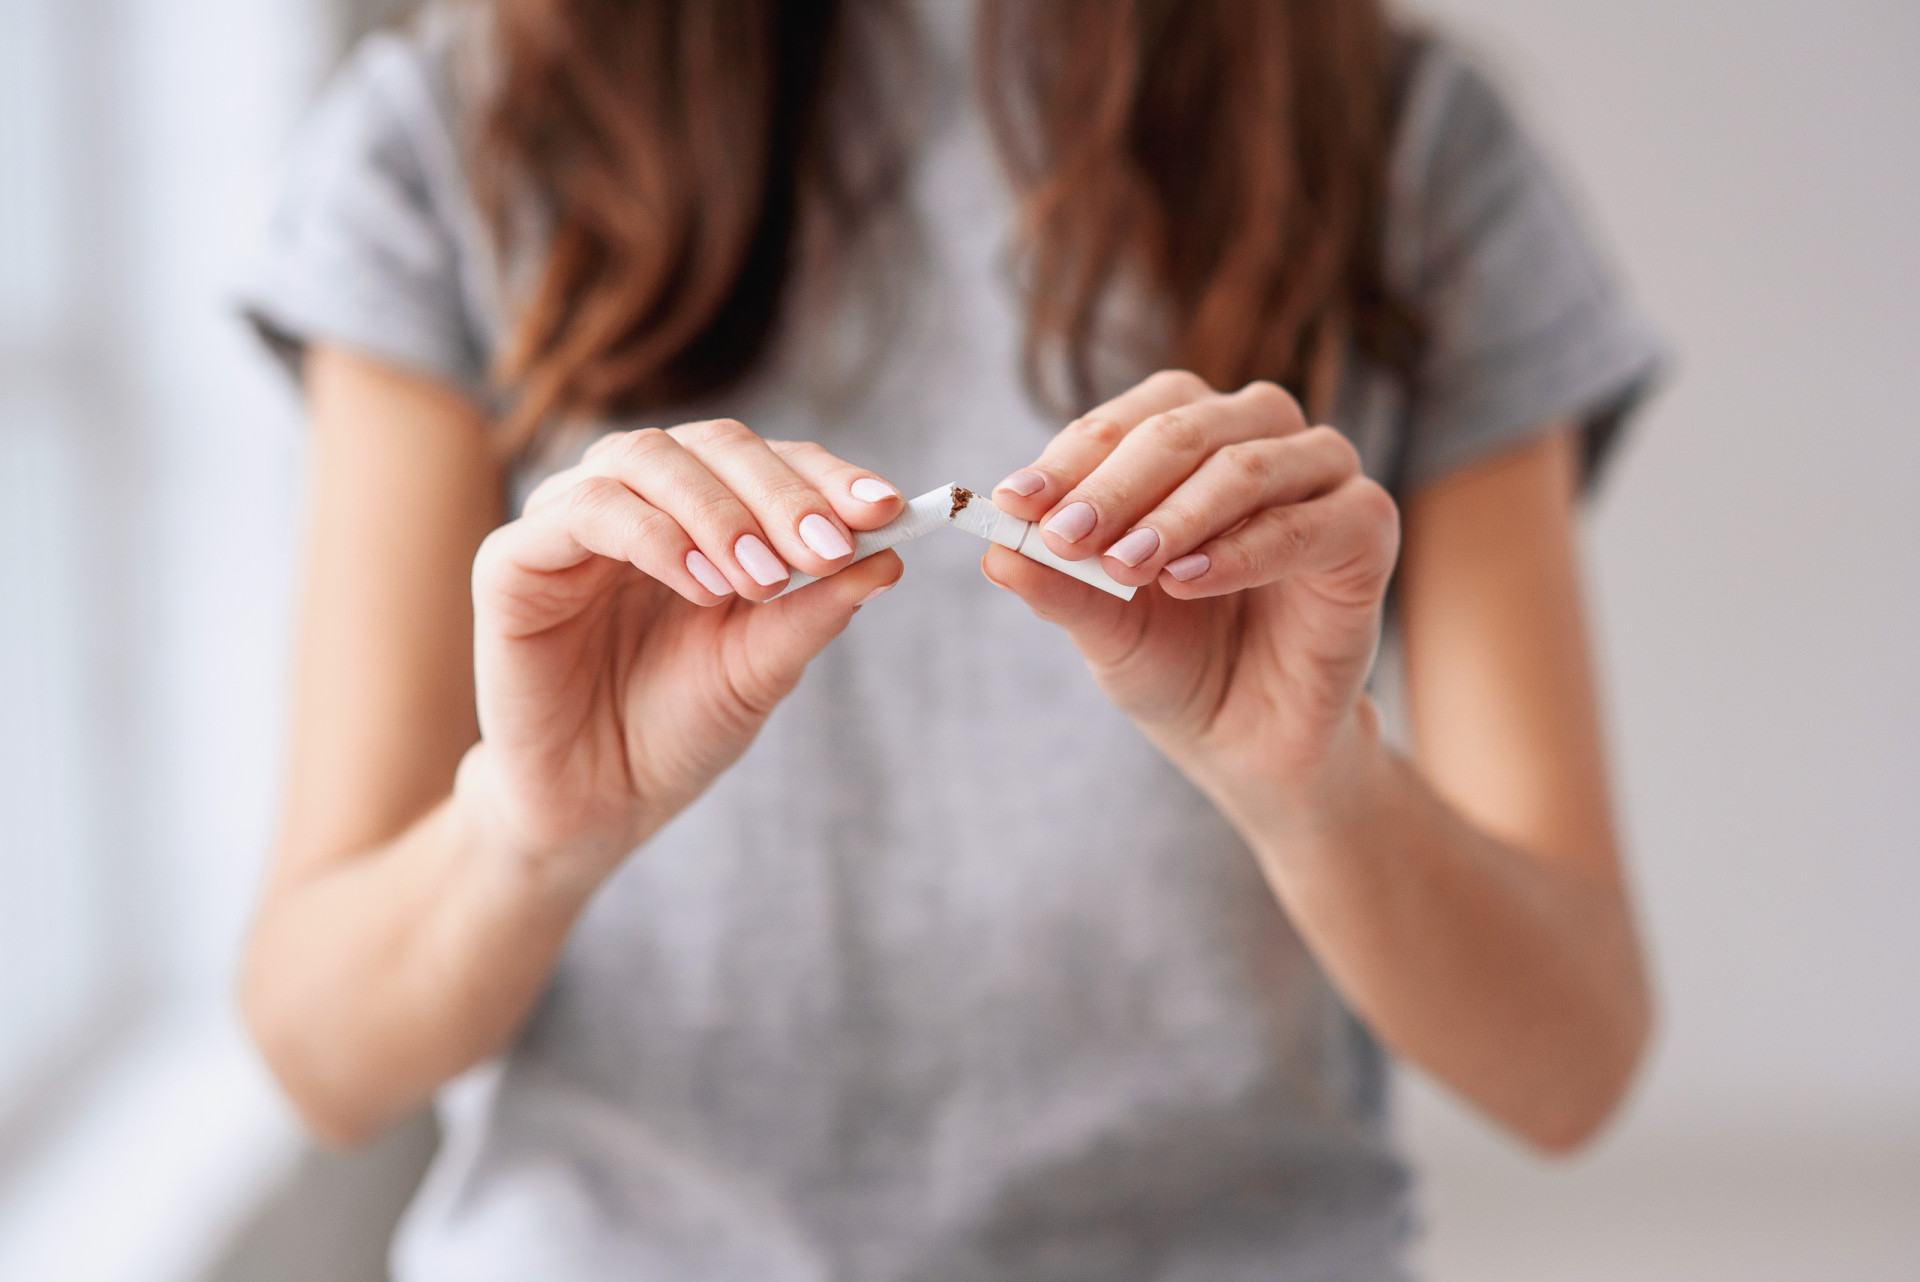 <p>Smoking affects blood clotting and circulation, which in turn increases the risk of DVT. If you're a smoker, the best thing you can do is to stop.</p><p><a href="https://www.msn.com/en-us/community/channel/vid-7xx8mnucu55yw63we9va2gwr7uihbxwc68fxqp25x6tg4ftibpra?cvid=94631541bc0f4f89bfd59158d696ad7e">Follow us and access great exclusive content every day</a></p>